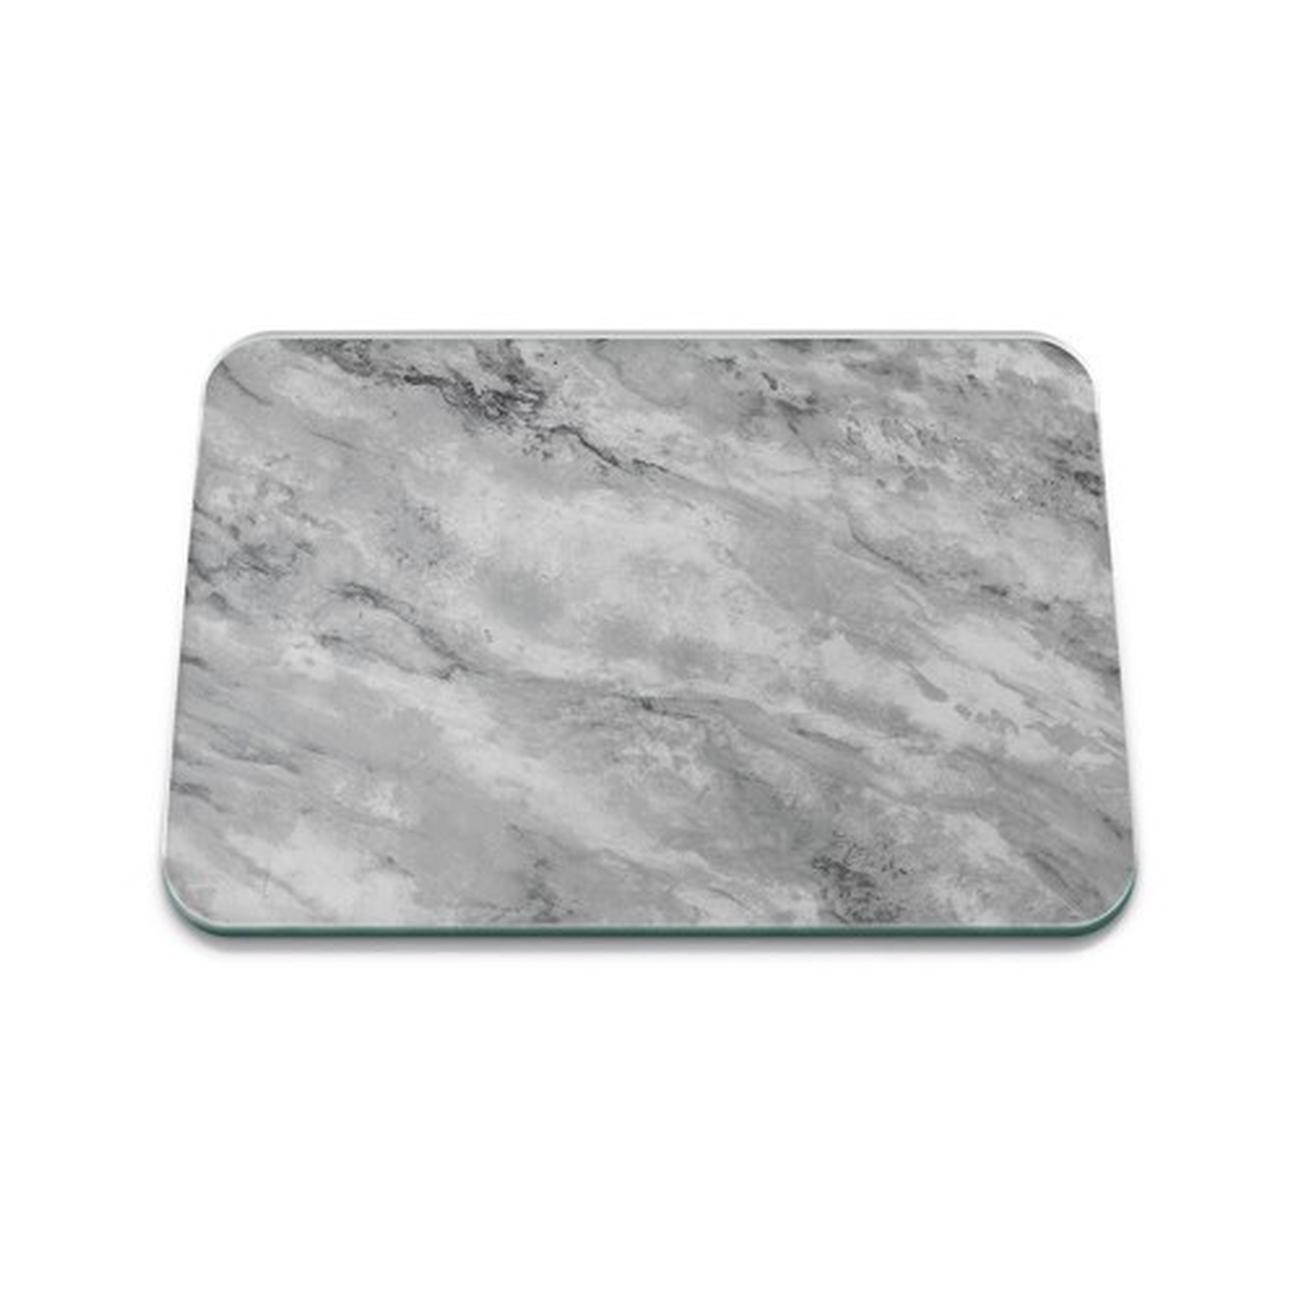 tuftop-marble-smooth-clear-worktop-protector - Tuftop Marble Smooth Clear Worktop Protector